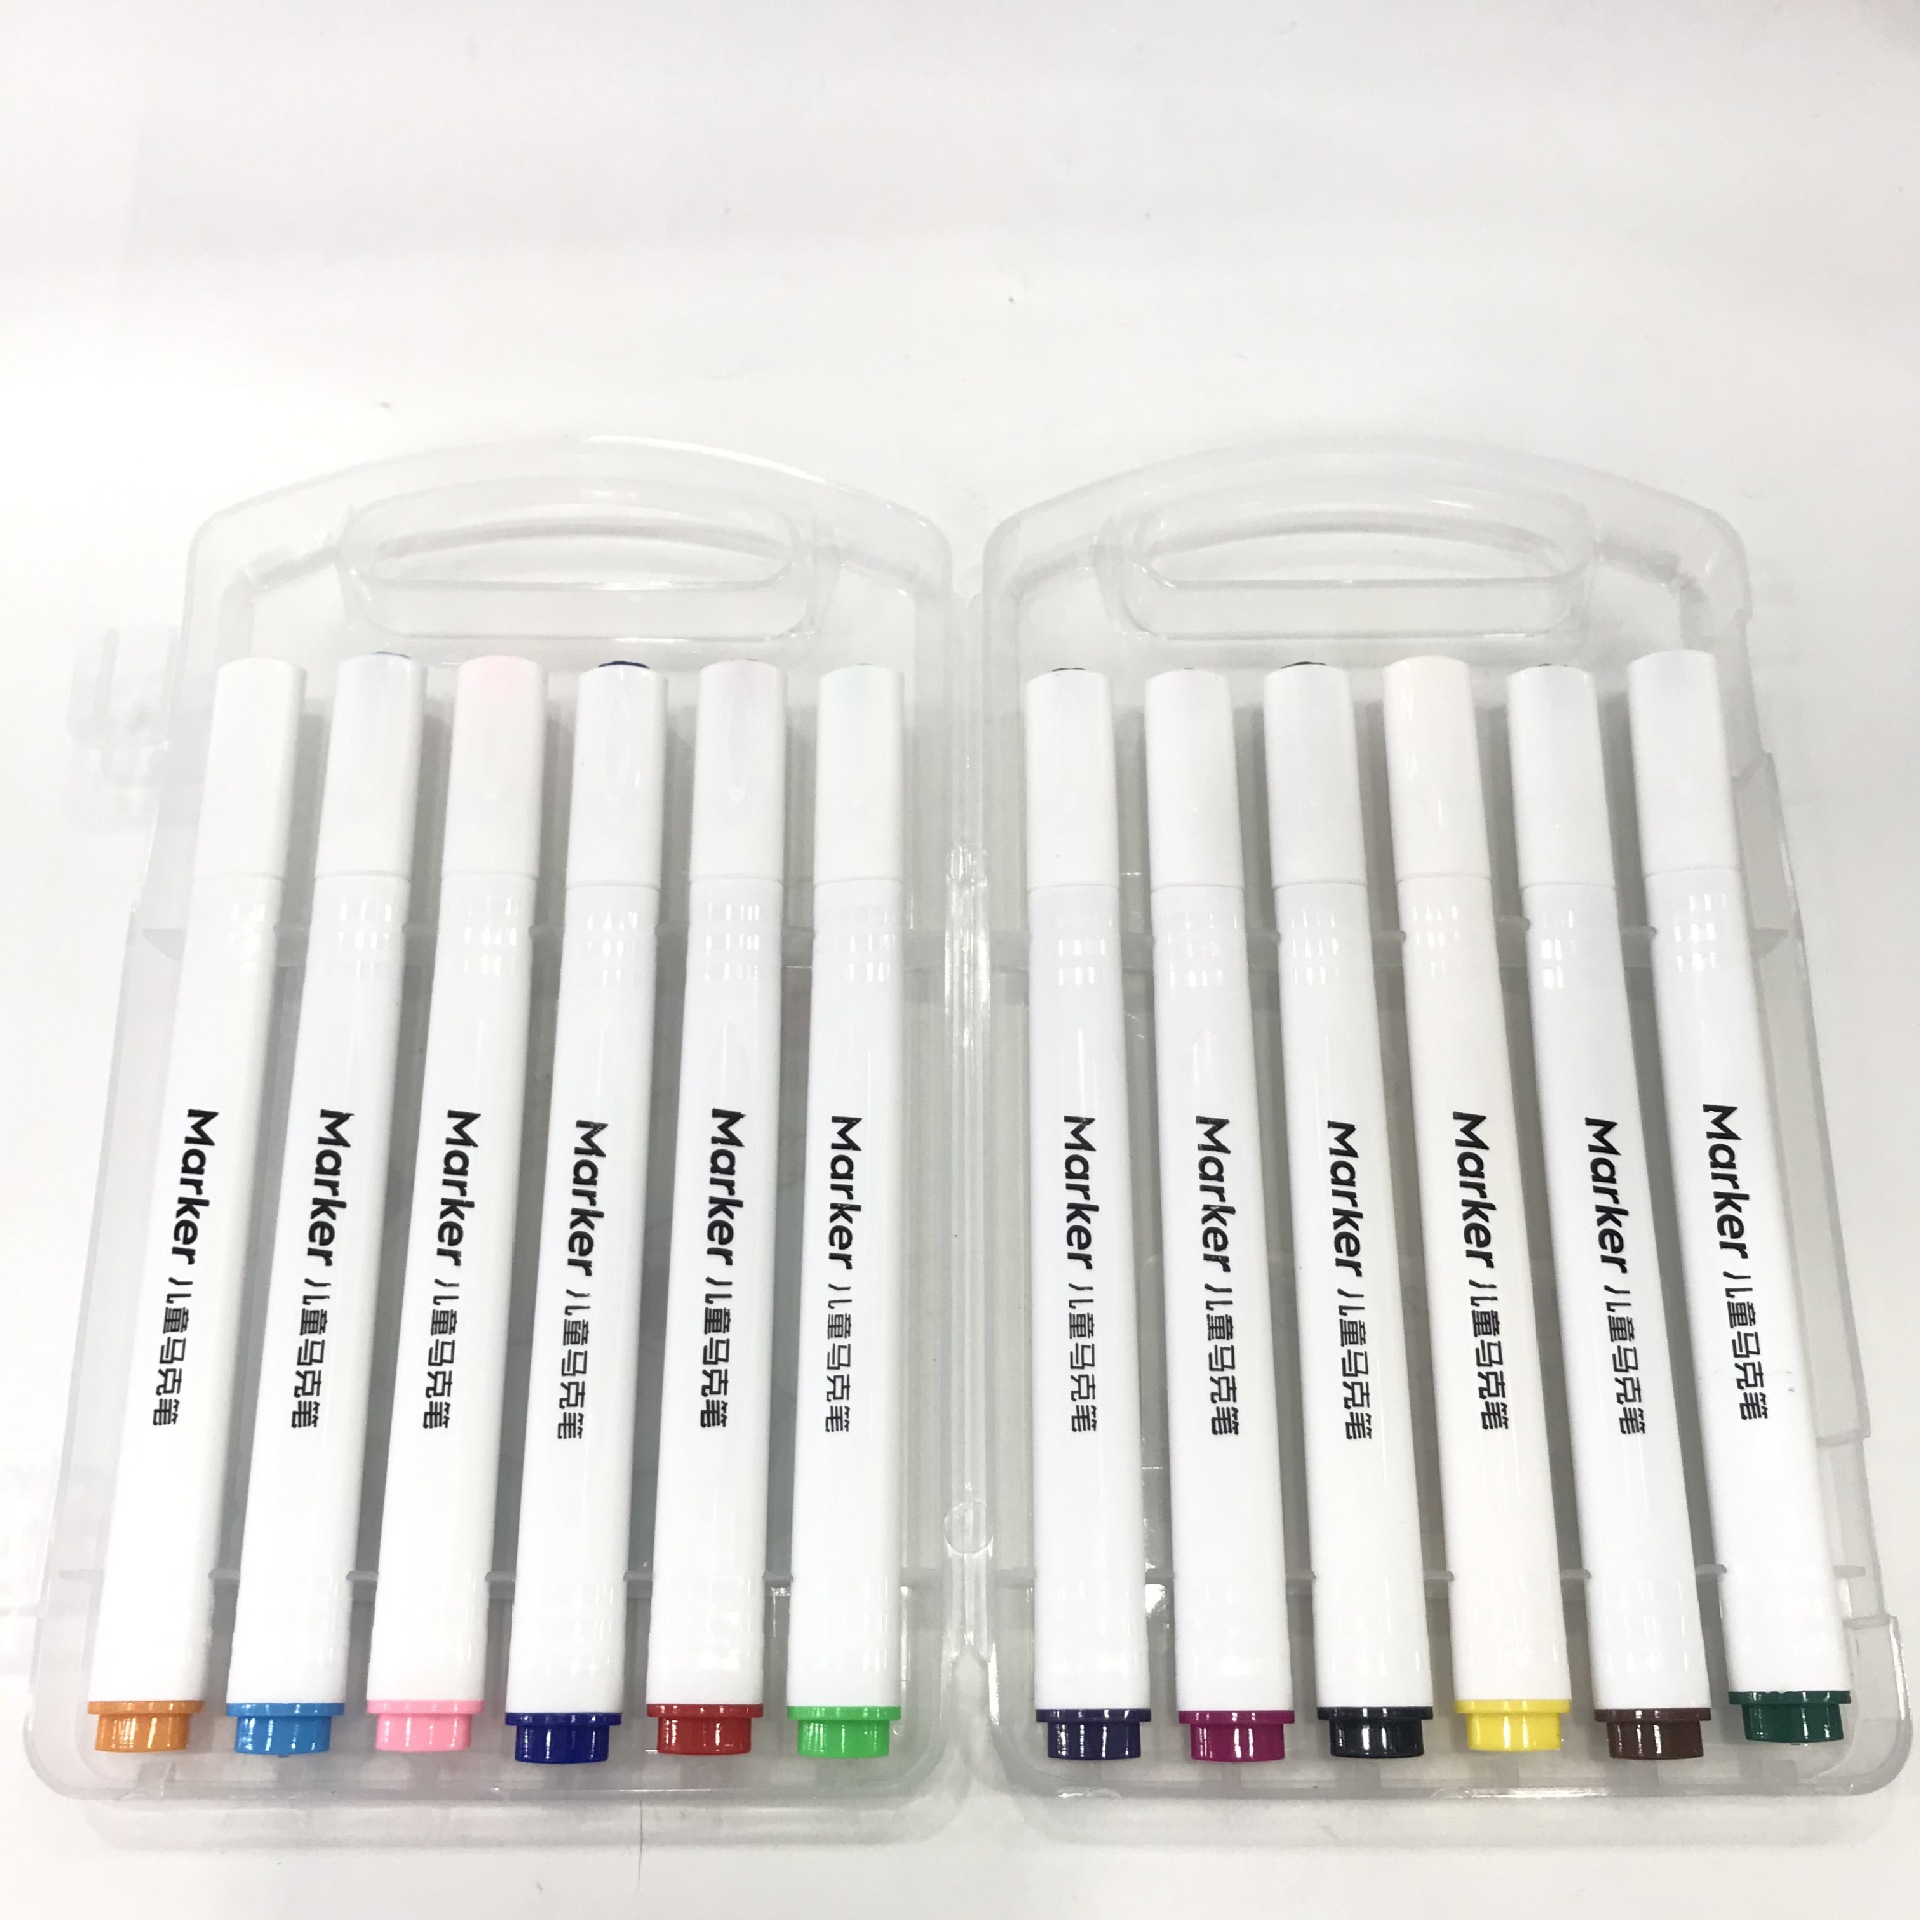 Student Painted Graffiti Stationery Gifts 12-color Painting DIY Soft Hair Marker Pen Triangle Penholder Painting Coloring Pen